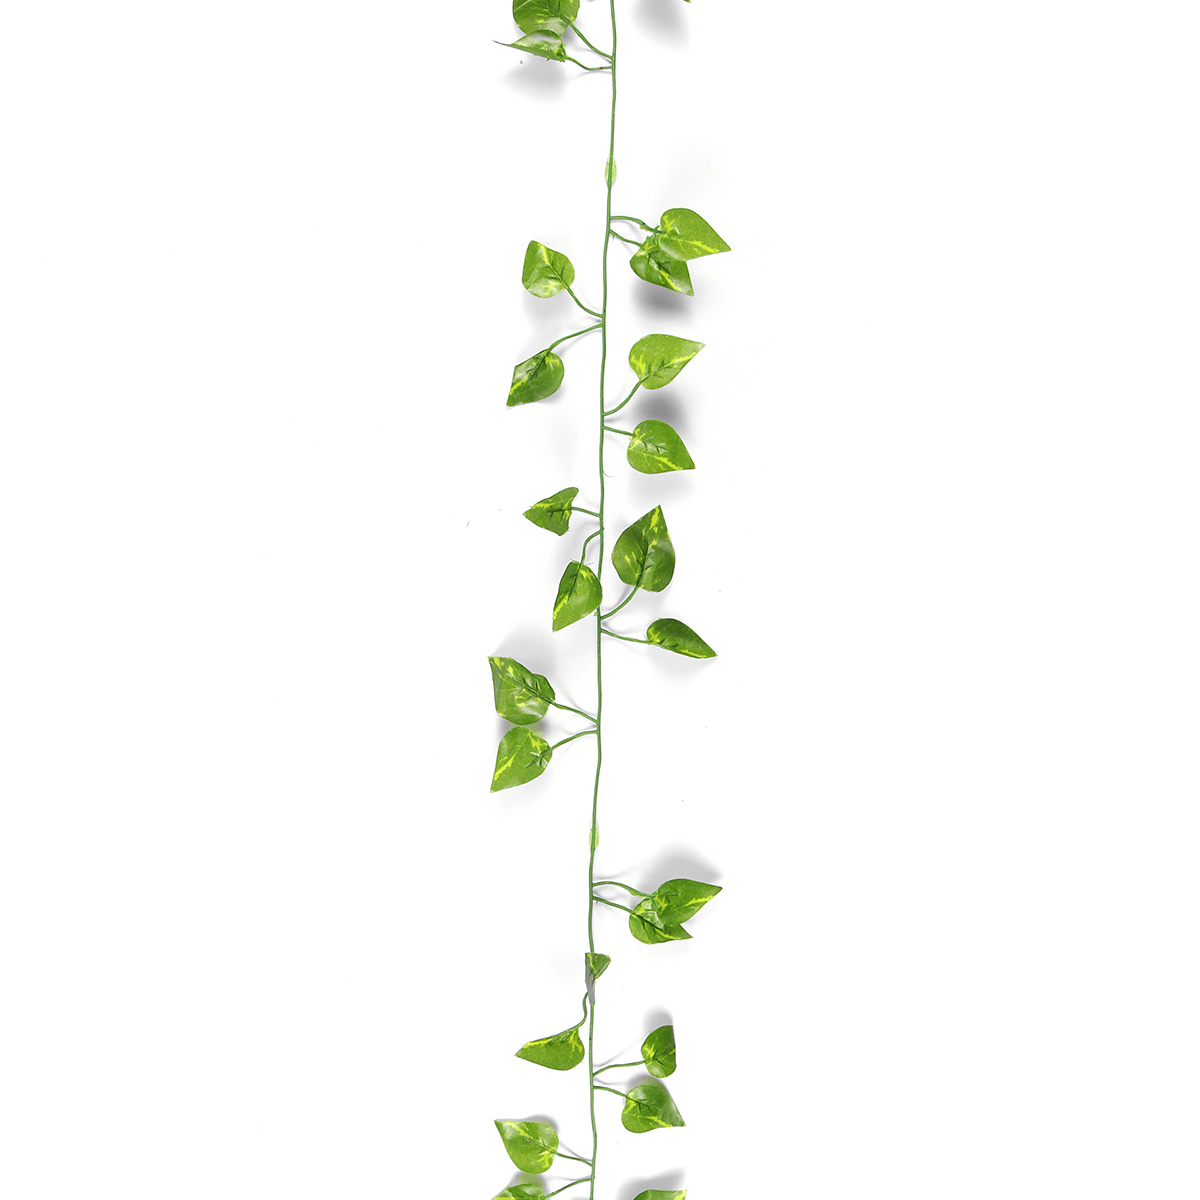 2M-Simulation-Vine-Artificial-Green-Leaves-Wedding-Home-Shop-Hanging-Decorations-1665941